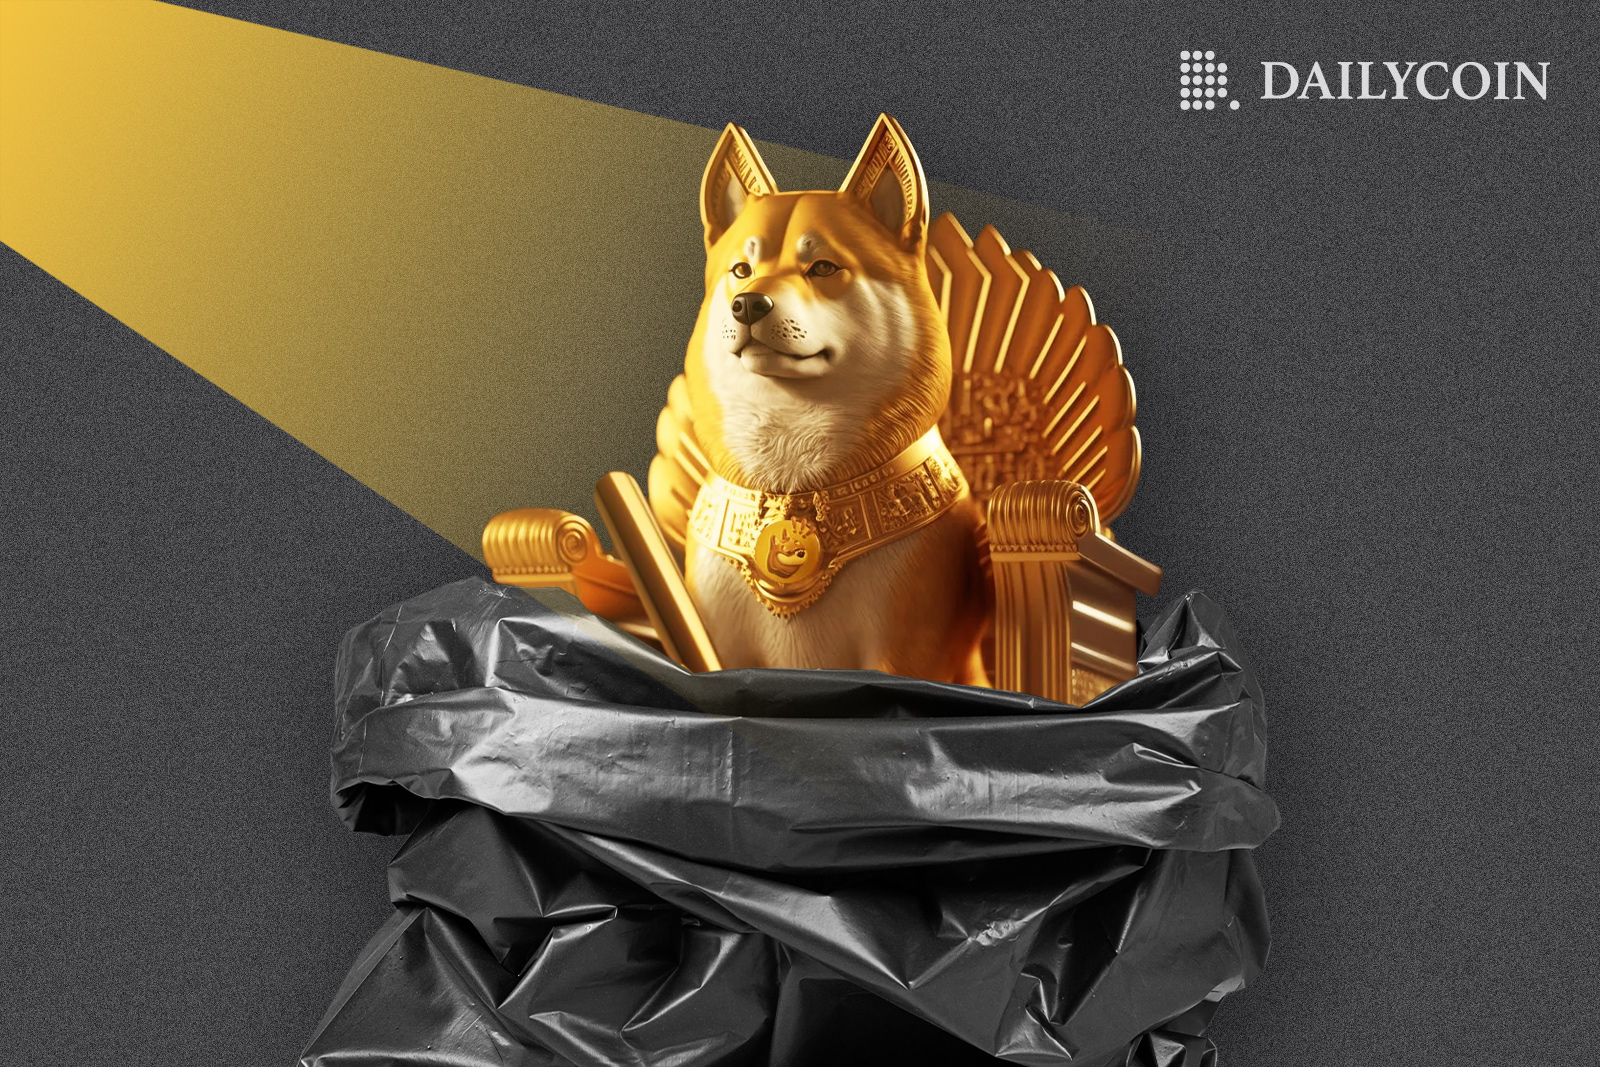 Golden statue of Shiba Inu dumbed in a trash bag,